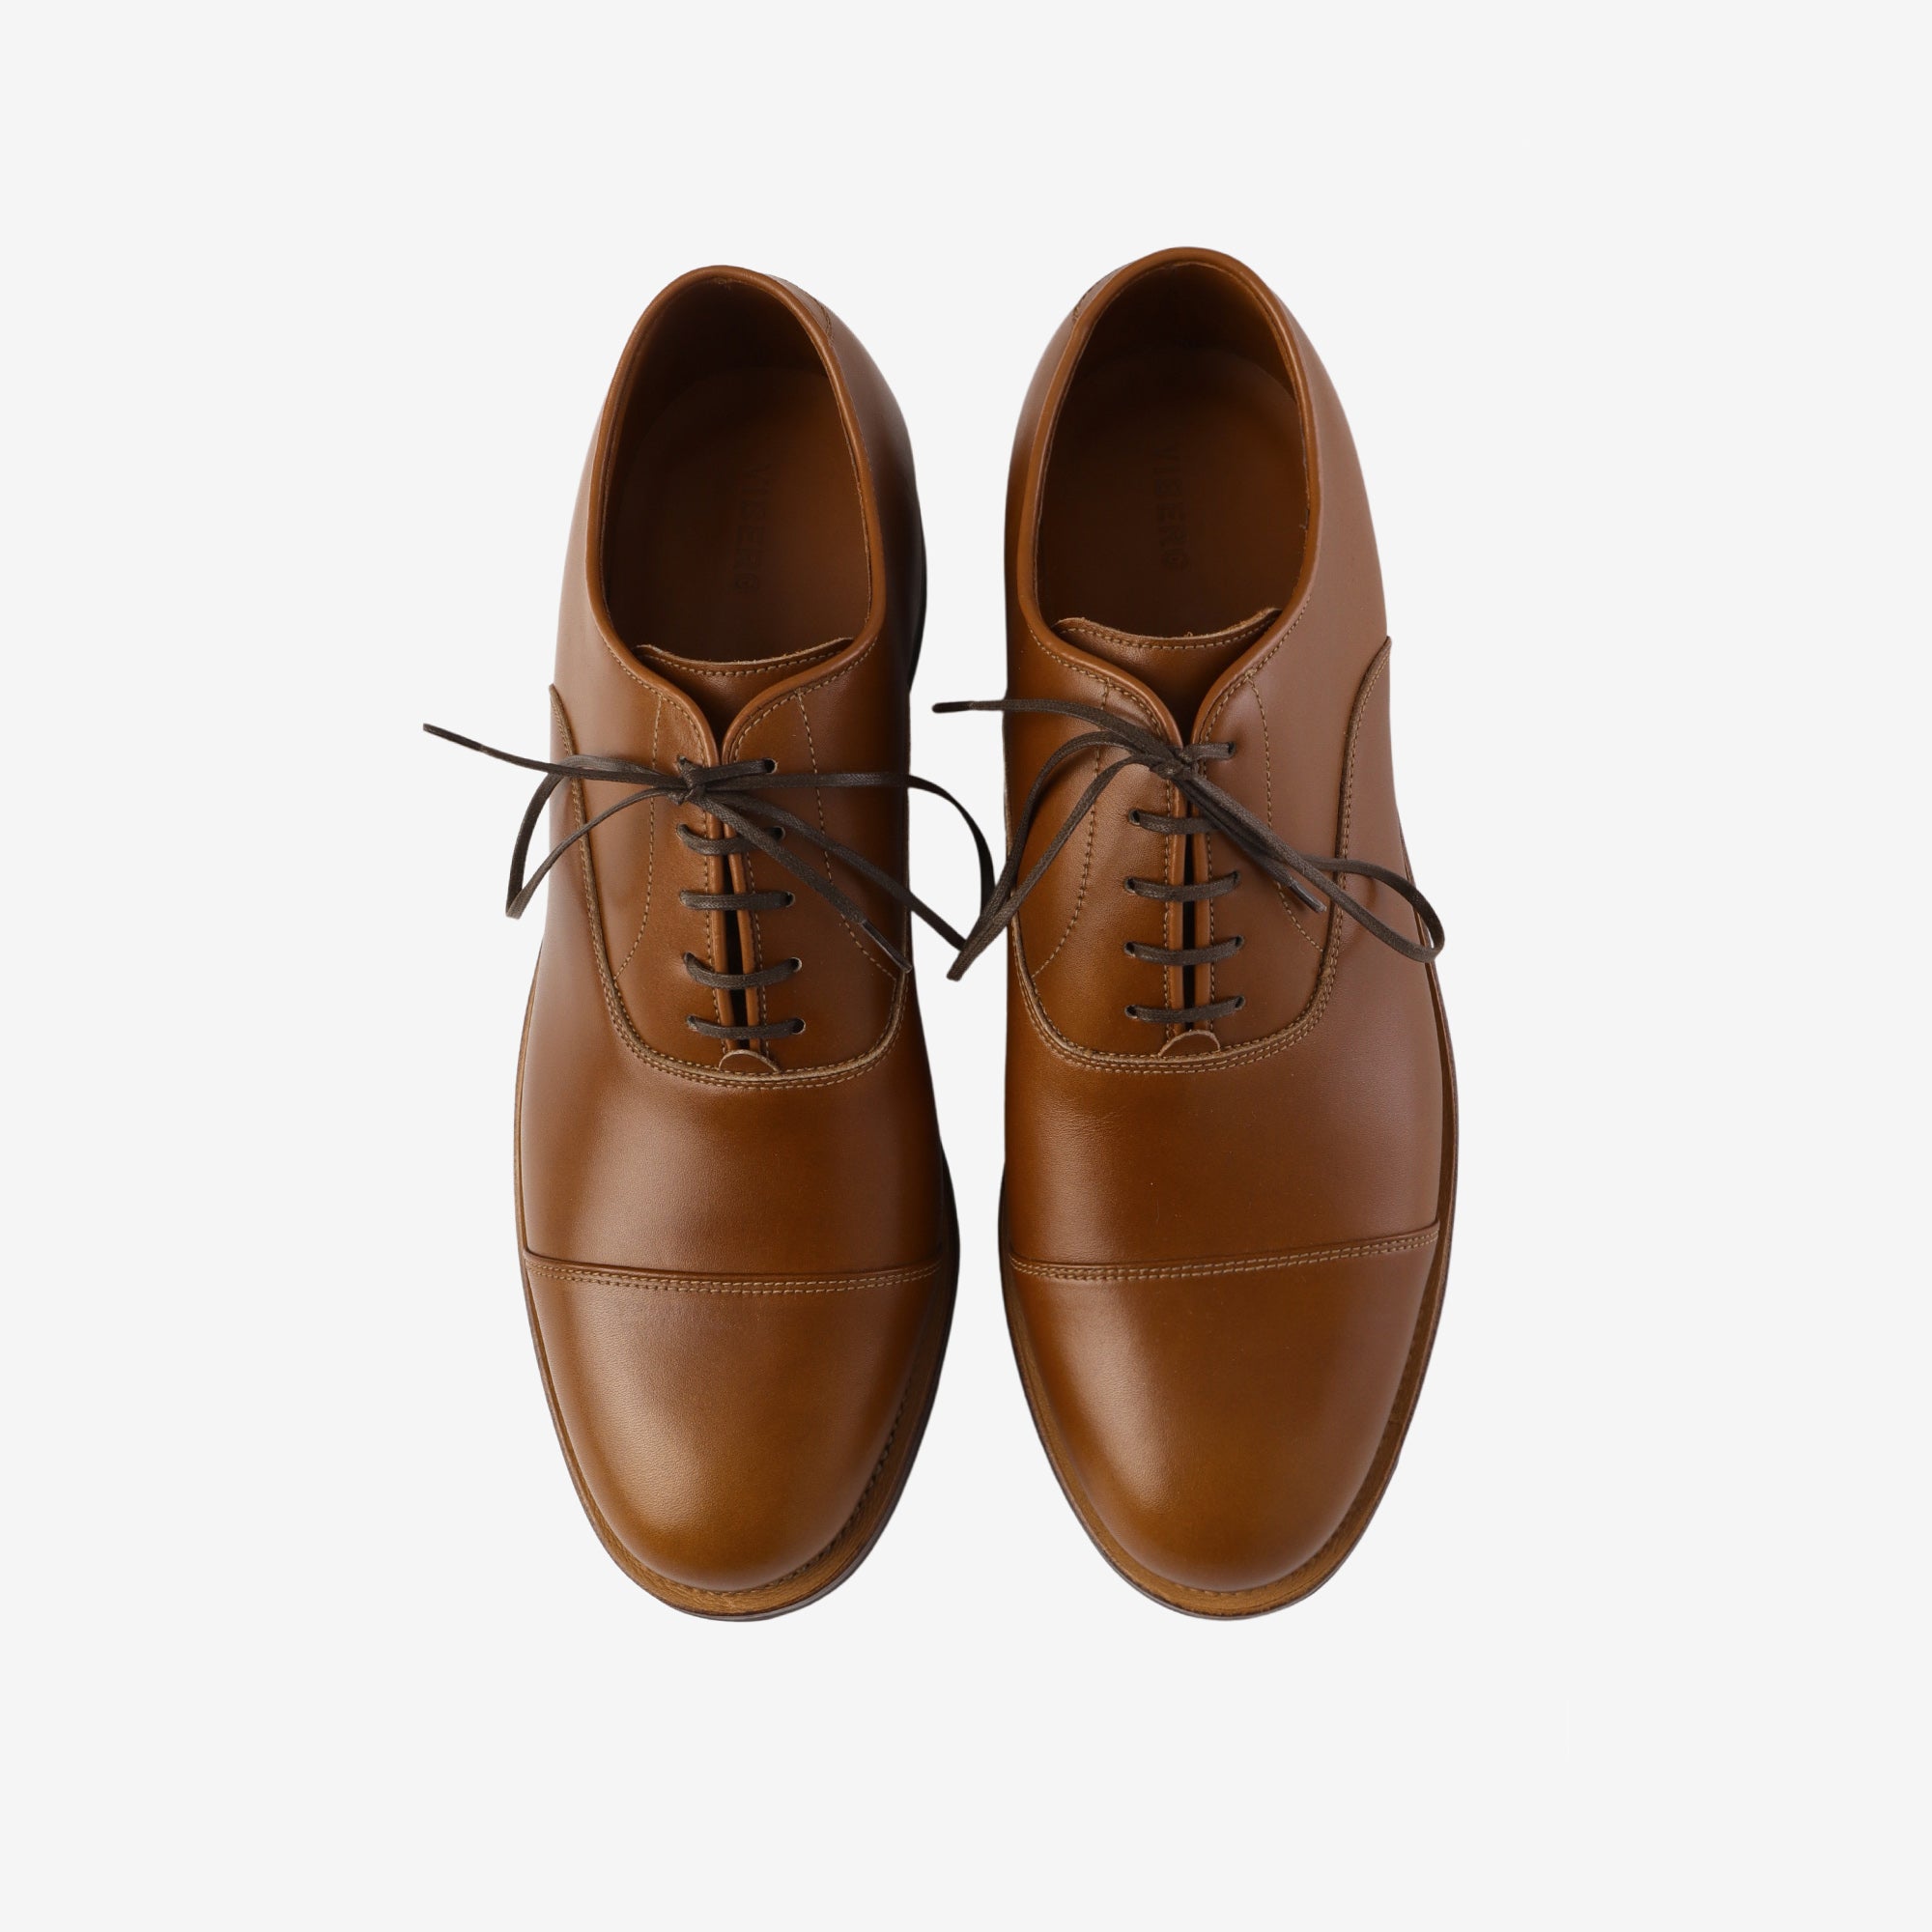 Bastion Oxford - Brown French Calf